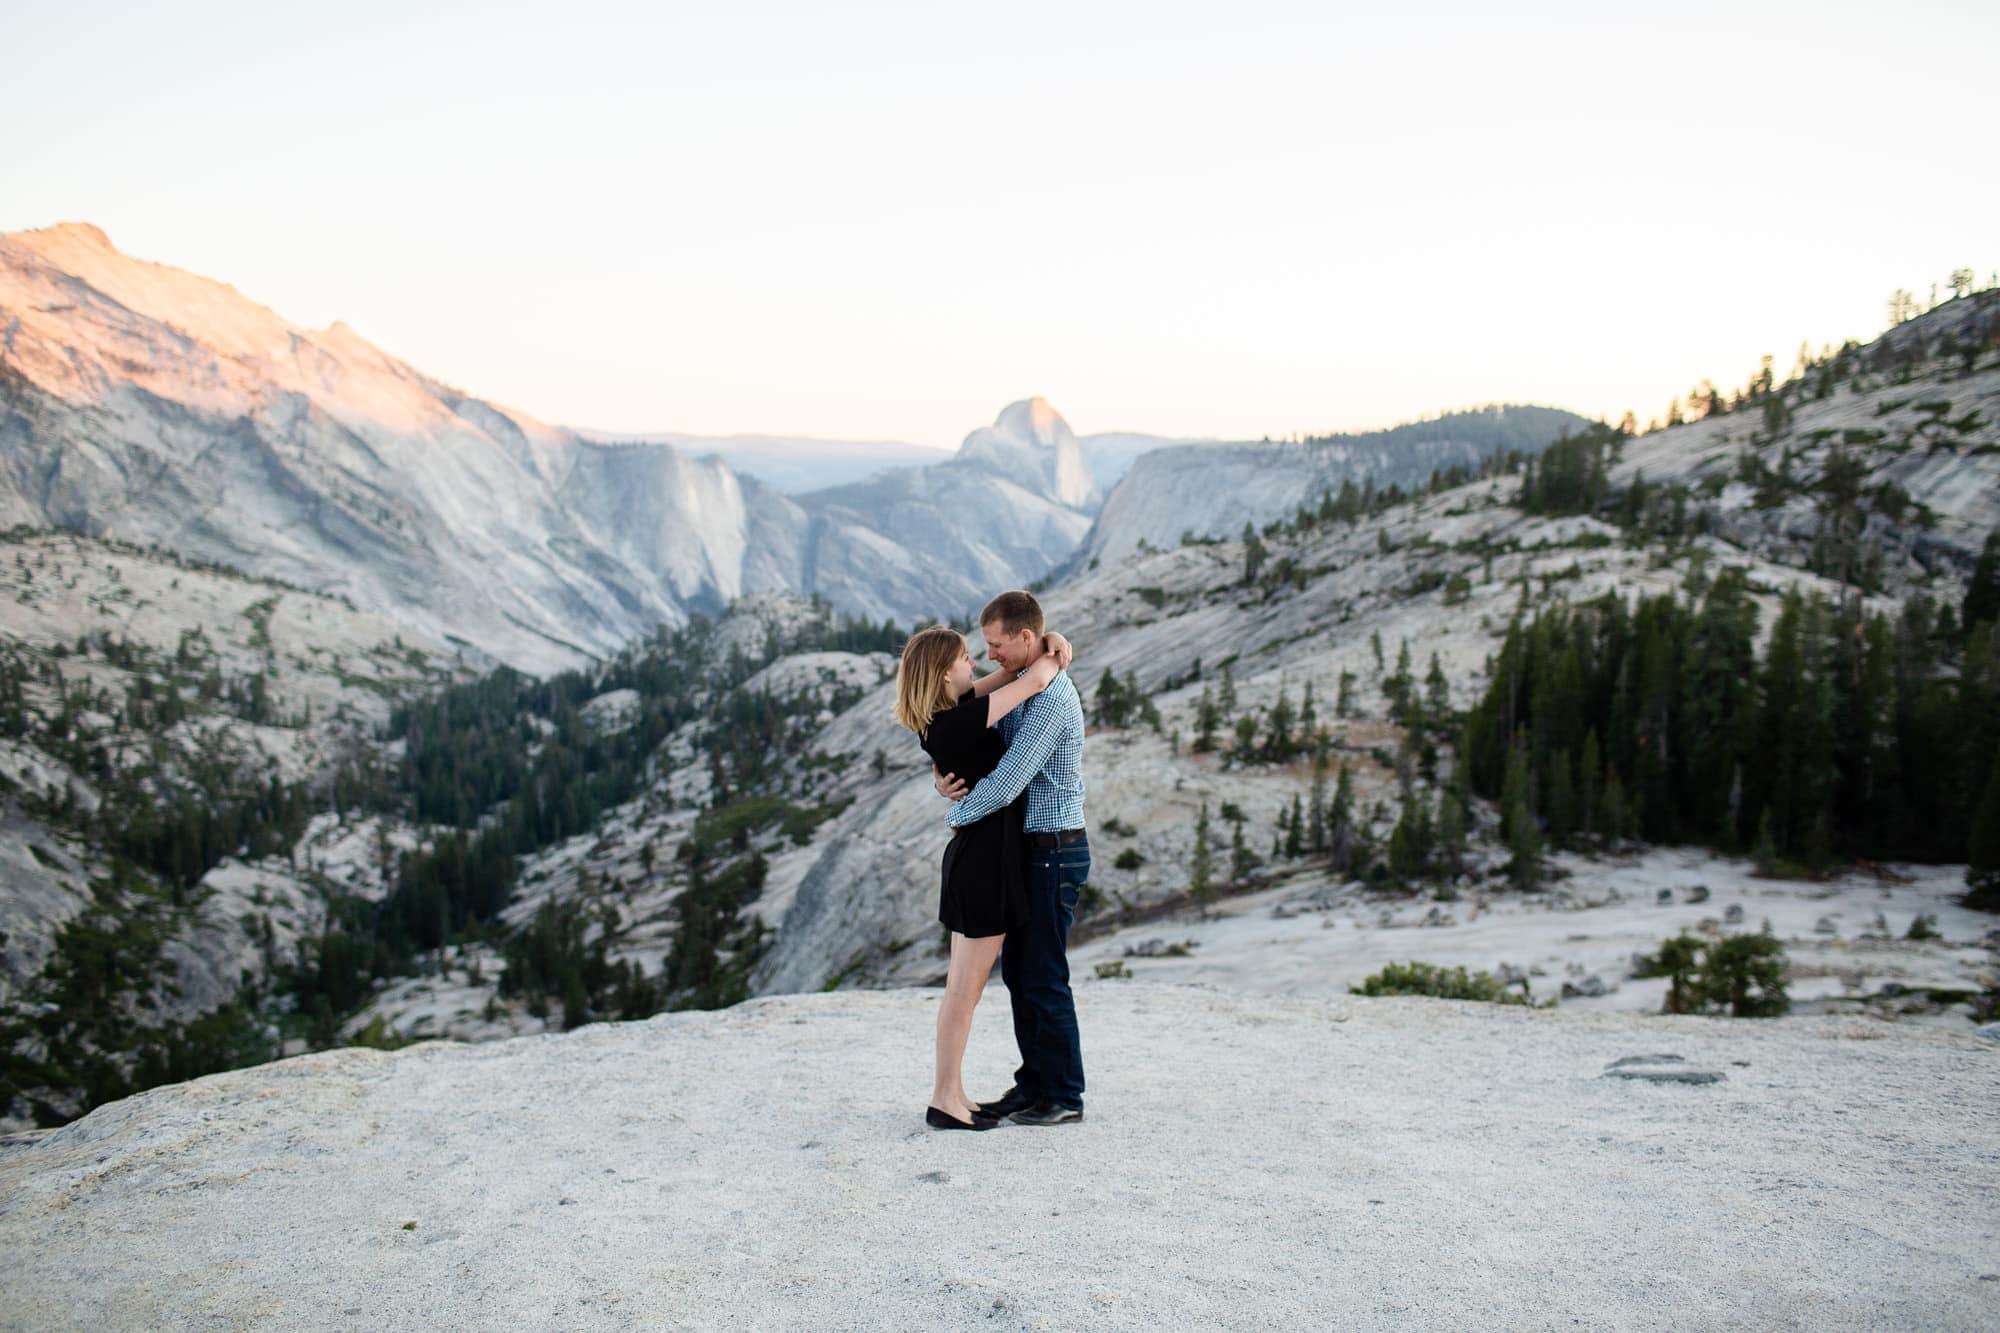 Man and Woman embracing at sunset on mountain with Half Dome in the background